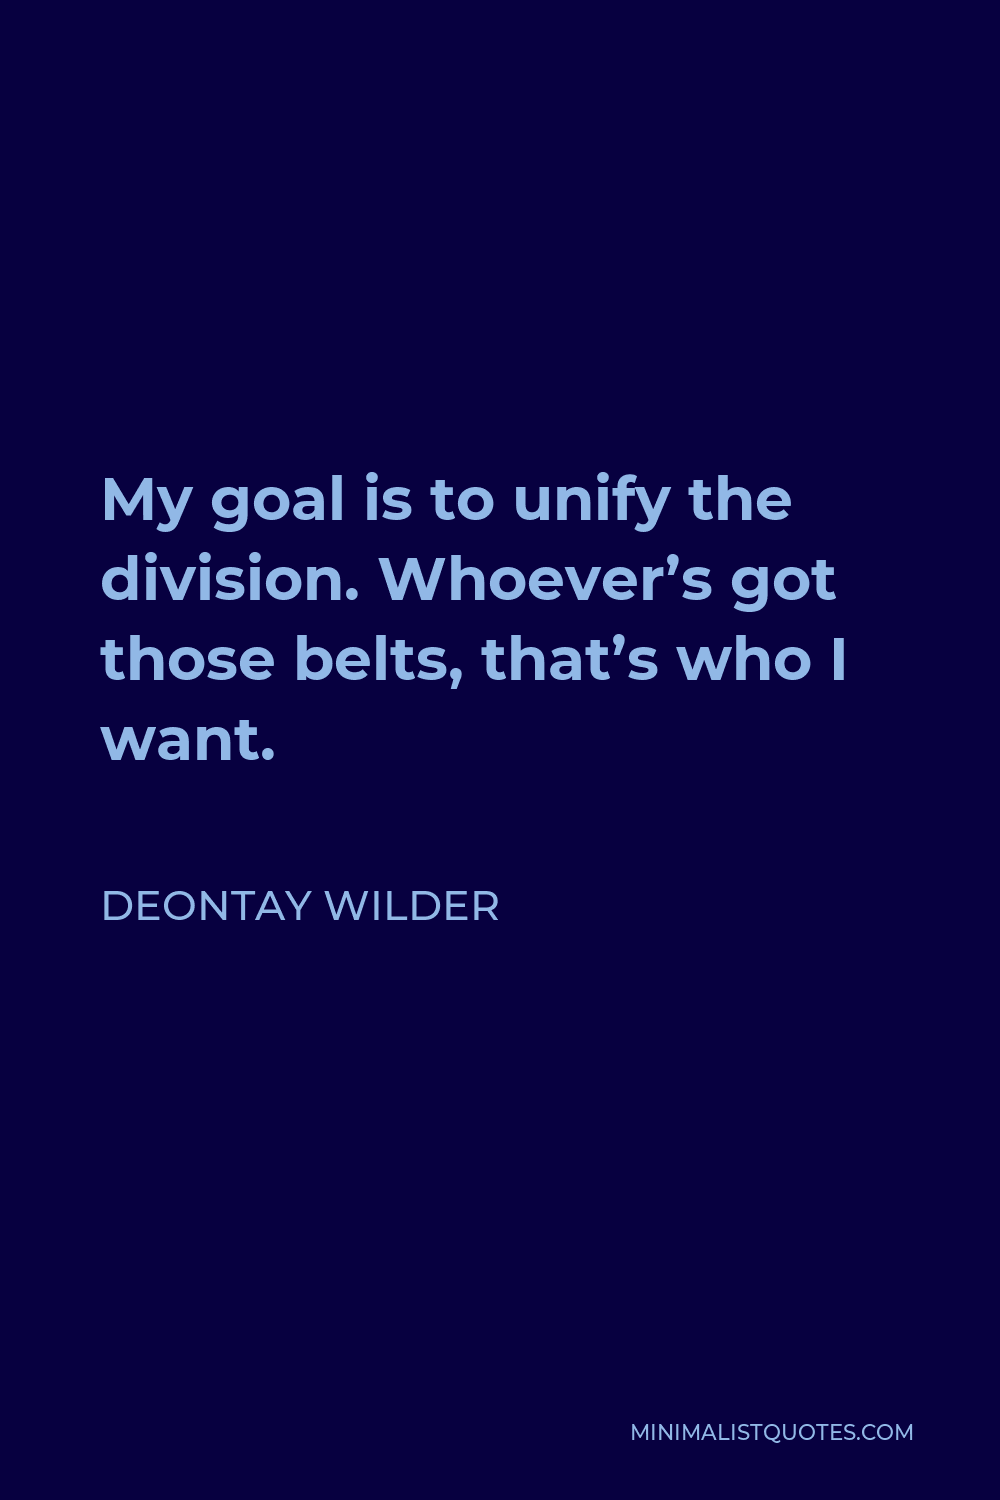 Deontay Wilder Quote - My goal is to unify the division. Whoever’s got those belts, that’s who I want.